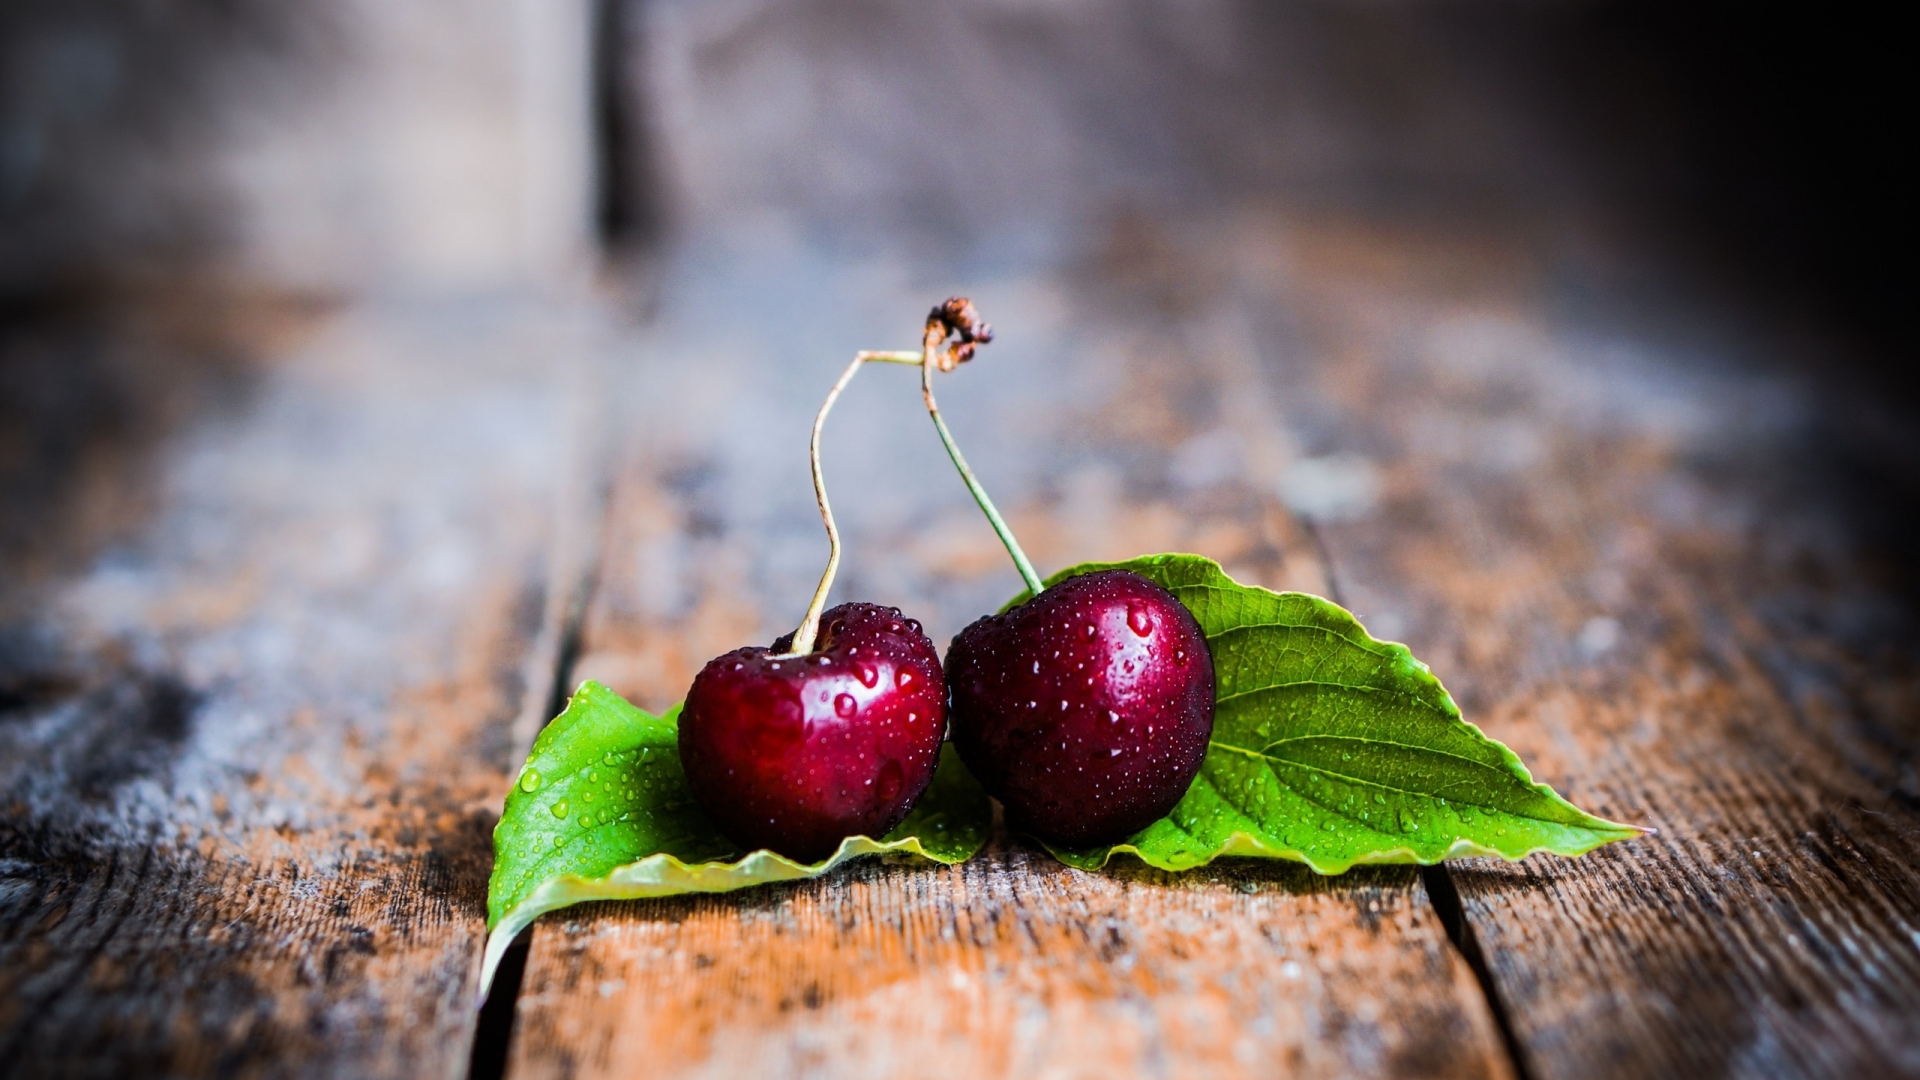 Two Cherries with Leaves for 1920 x 1080 HDTV 1080p resolution